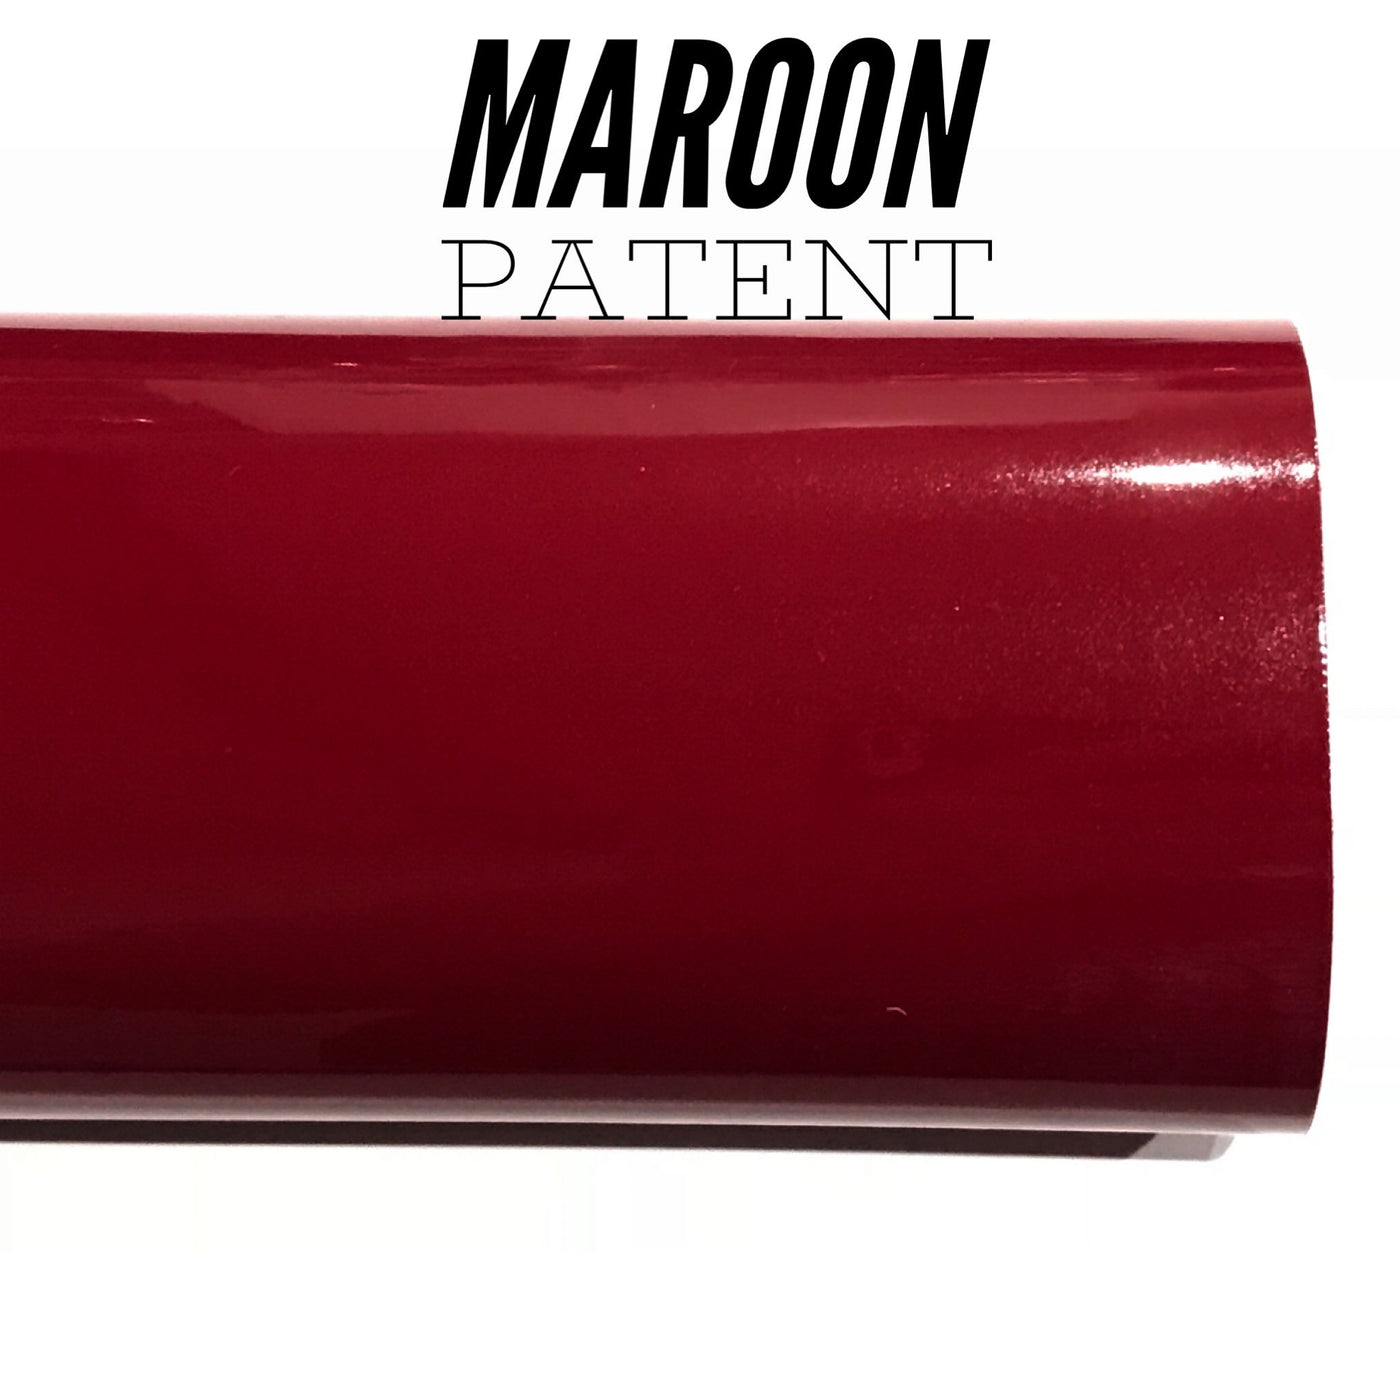 Marone Burgundy Patent Leather A5 Sheet Glossy Smooth PU Leatherette maroon